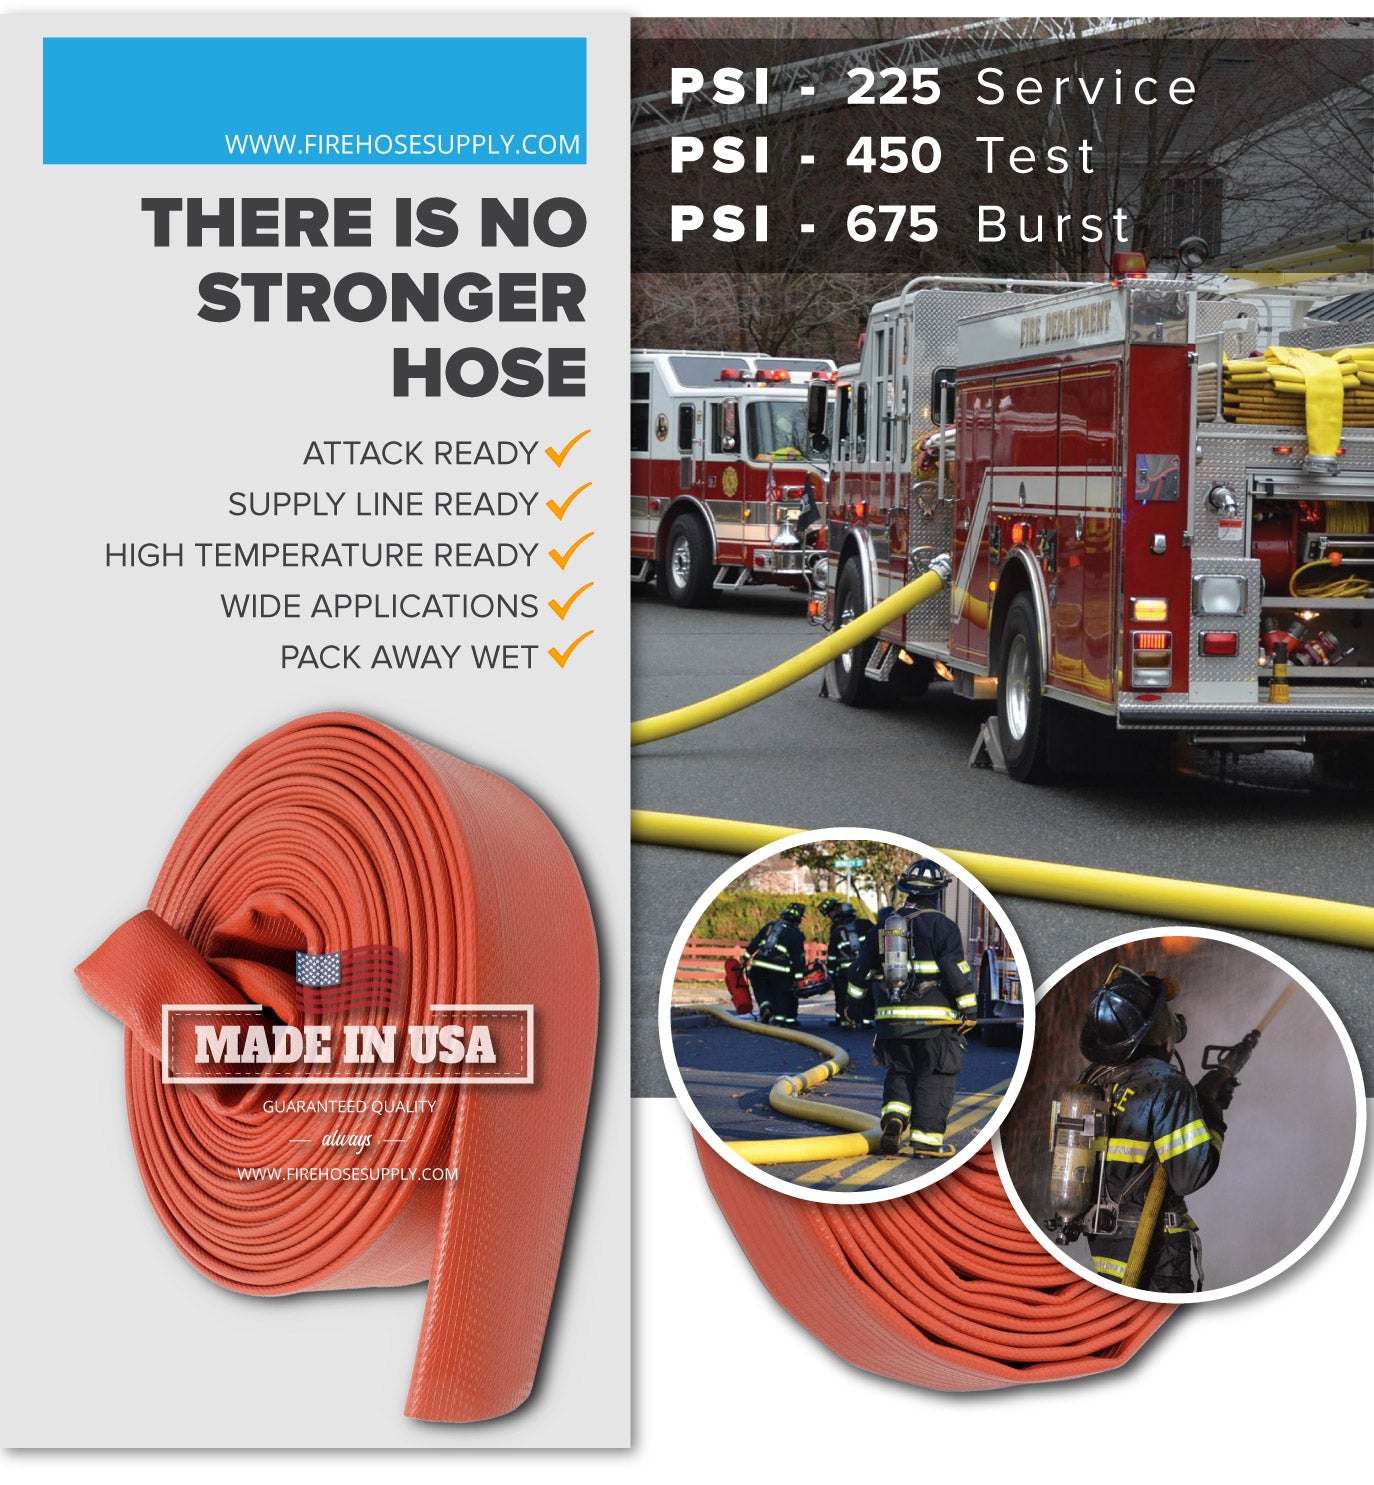 5 Inch Rubber Fire Hose Material Only Supply And Attack Ready Firefighter Red 675 PSI Test